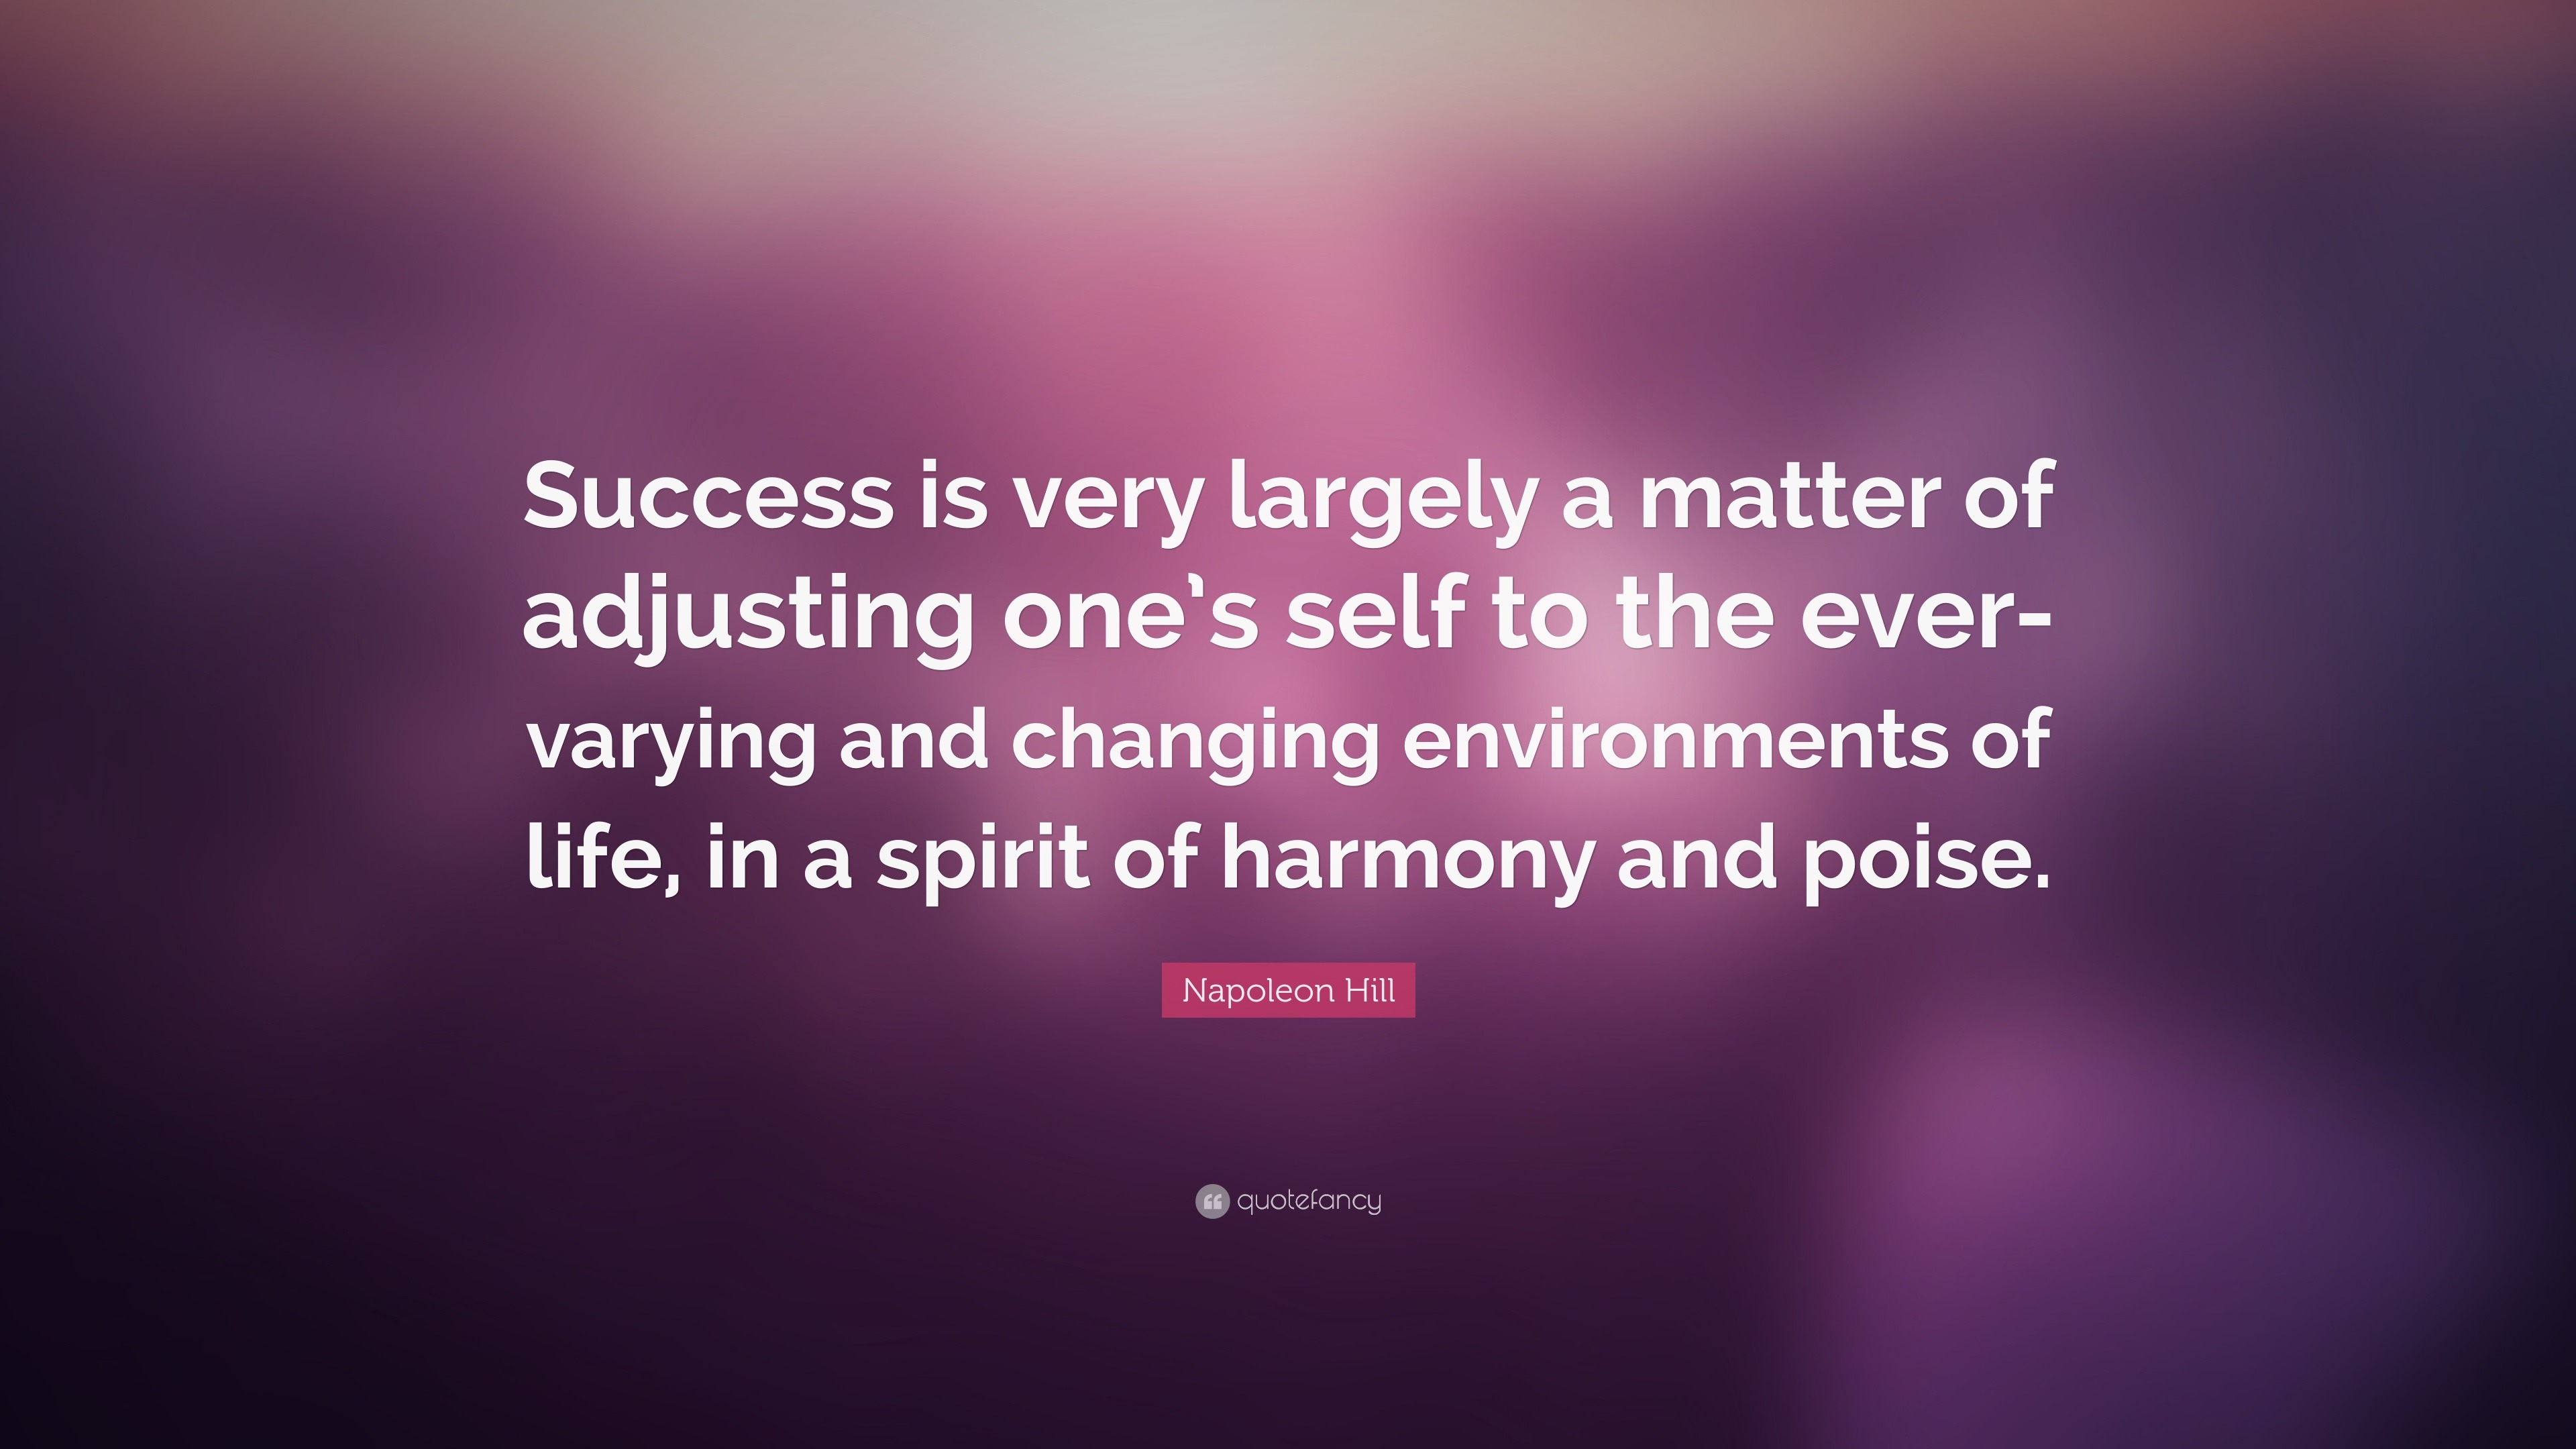 Napoleon Hill Quote: “Success is very largely a matter of adjusting one ...